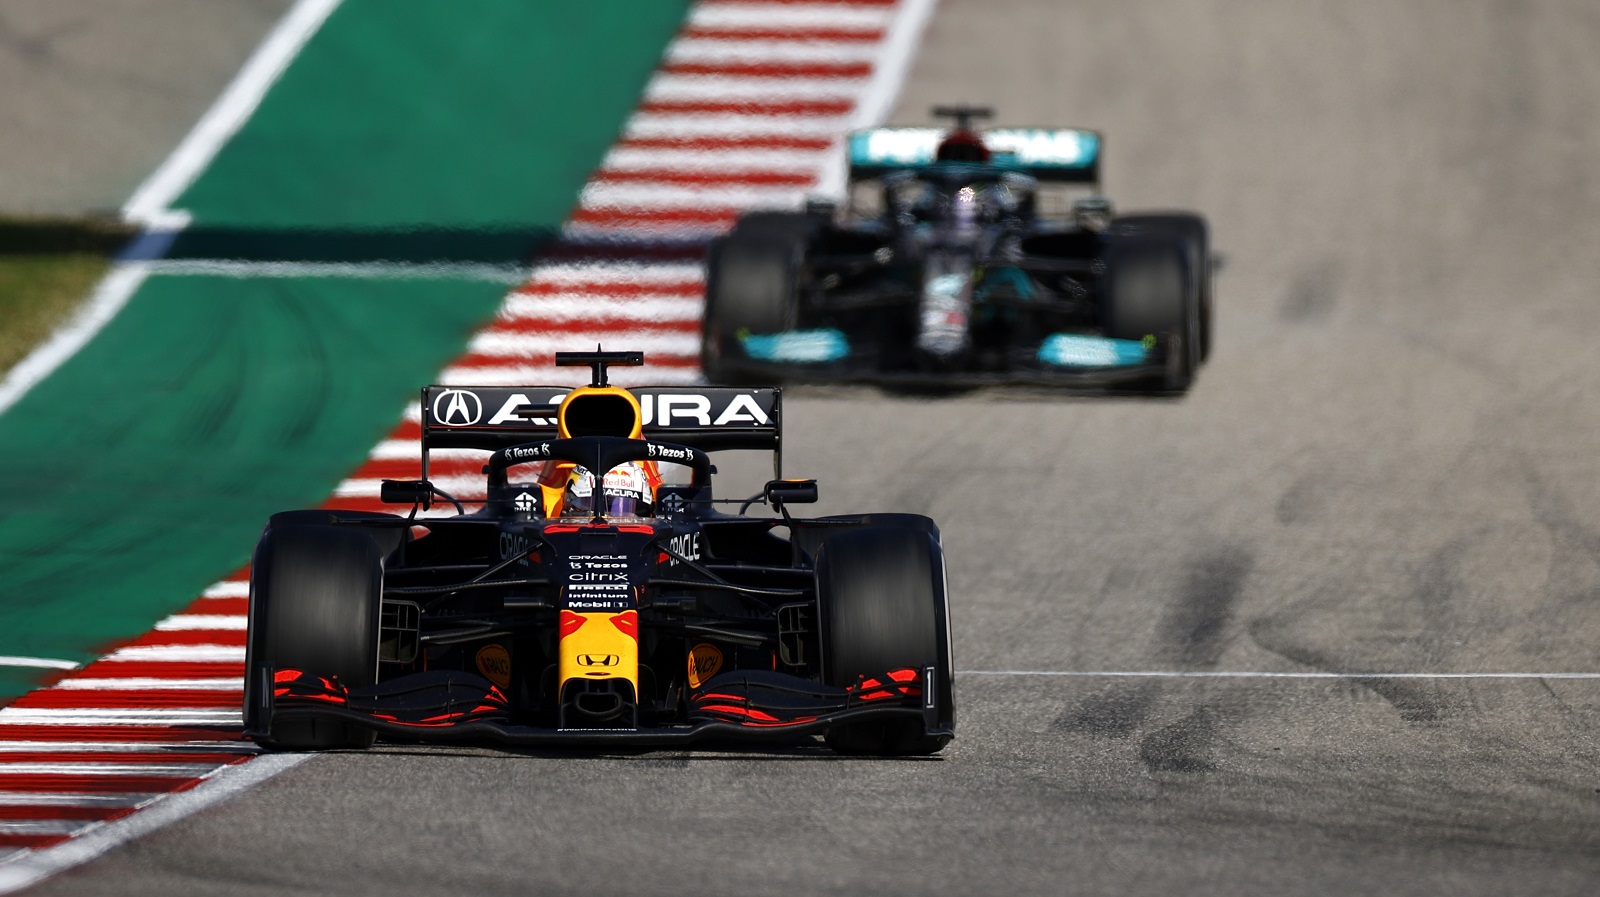 Max Verstappen leads Lewis Hamilton during the Formula 1 U.S. Grand Prix at Circuit of the Americas on Oct. 24, 2021 in Austin, Texas. | Jared C. Tilton/Getty Images